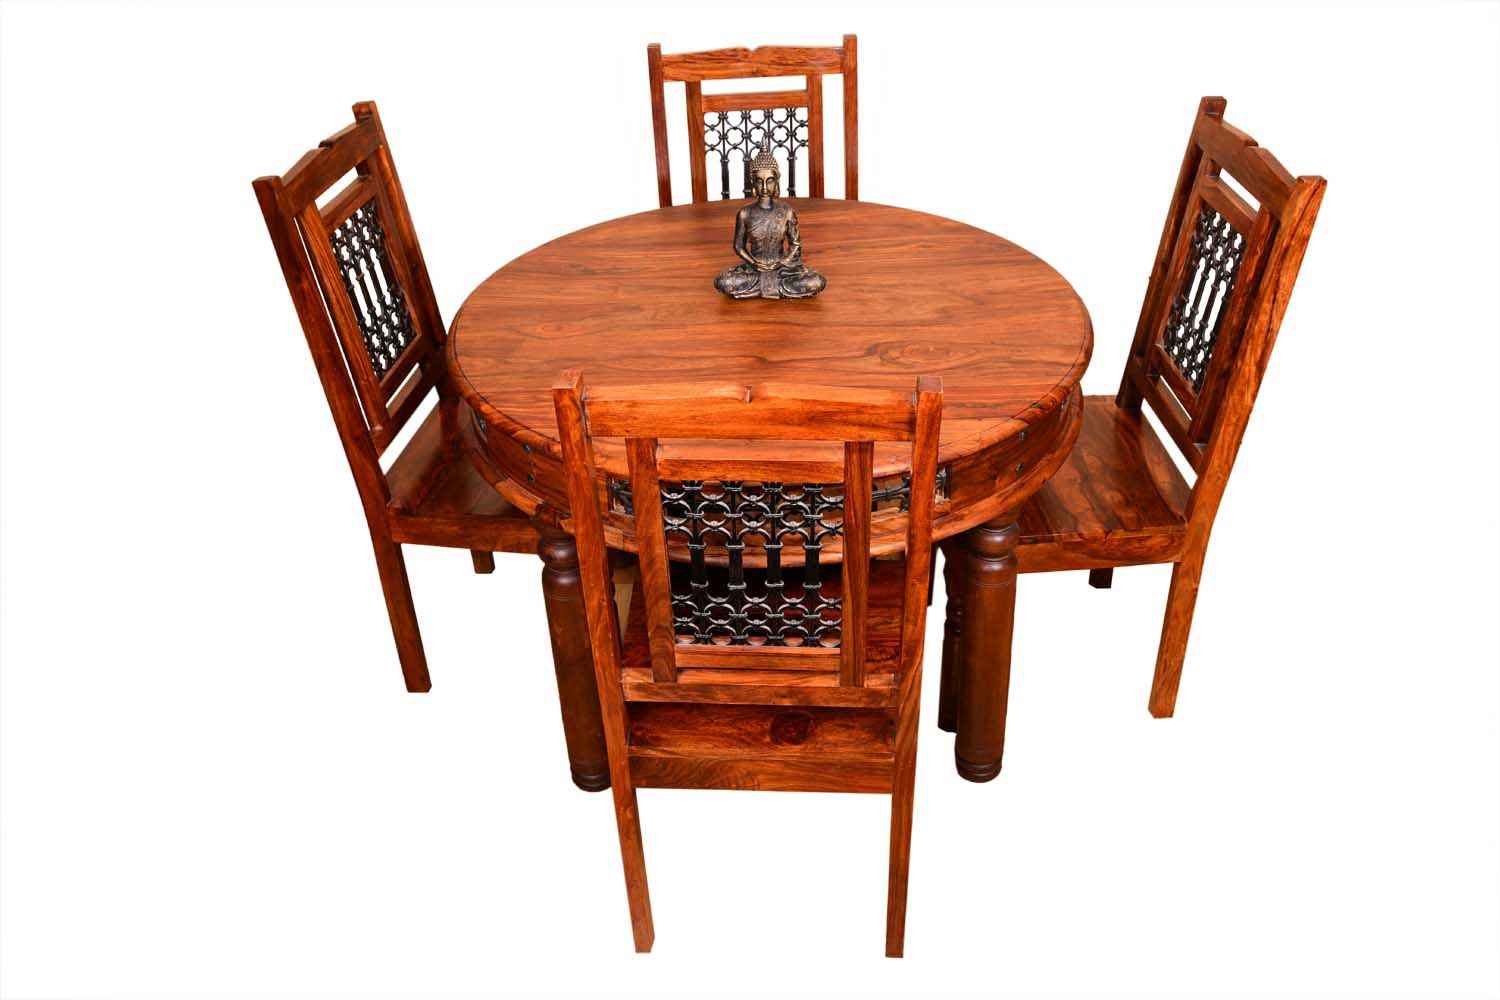 Tall Dining Room Table With 2 Captains Chair